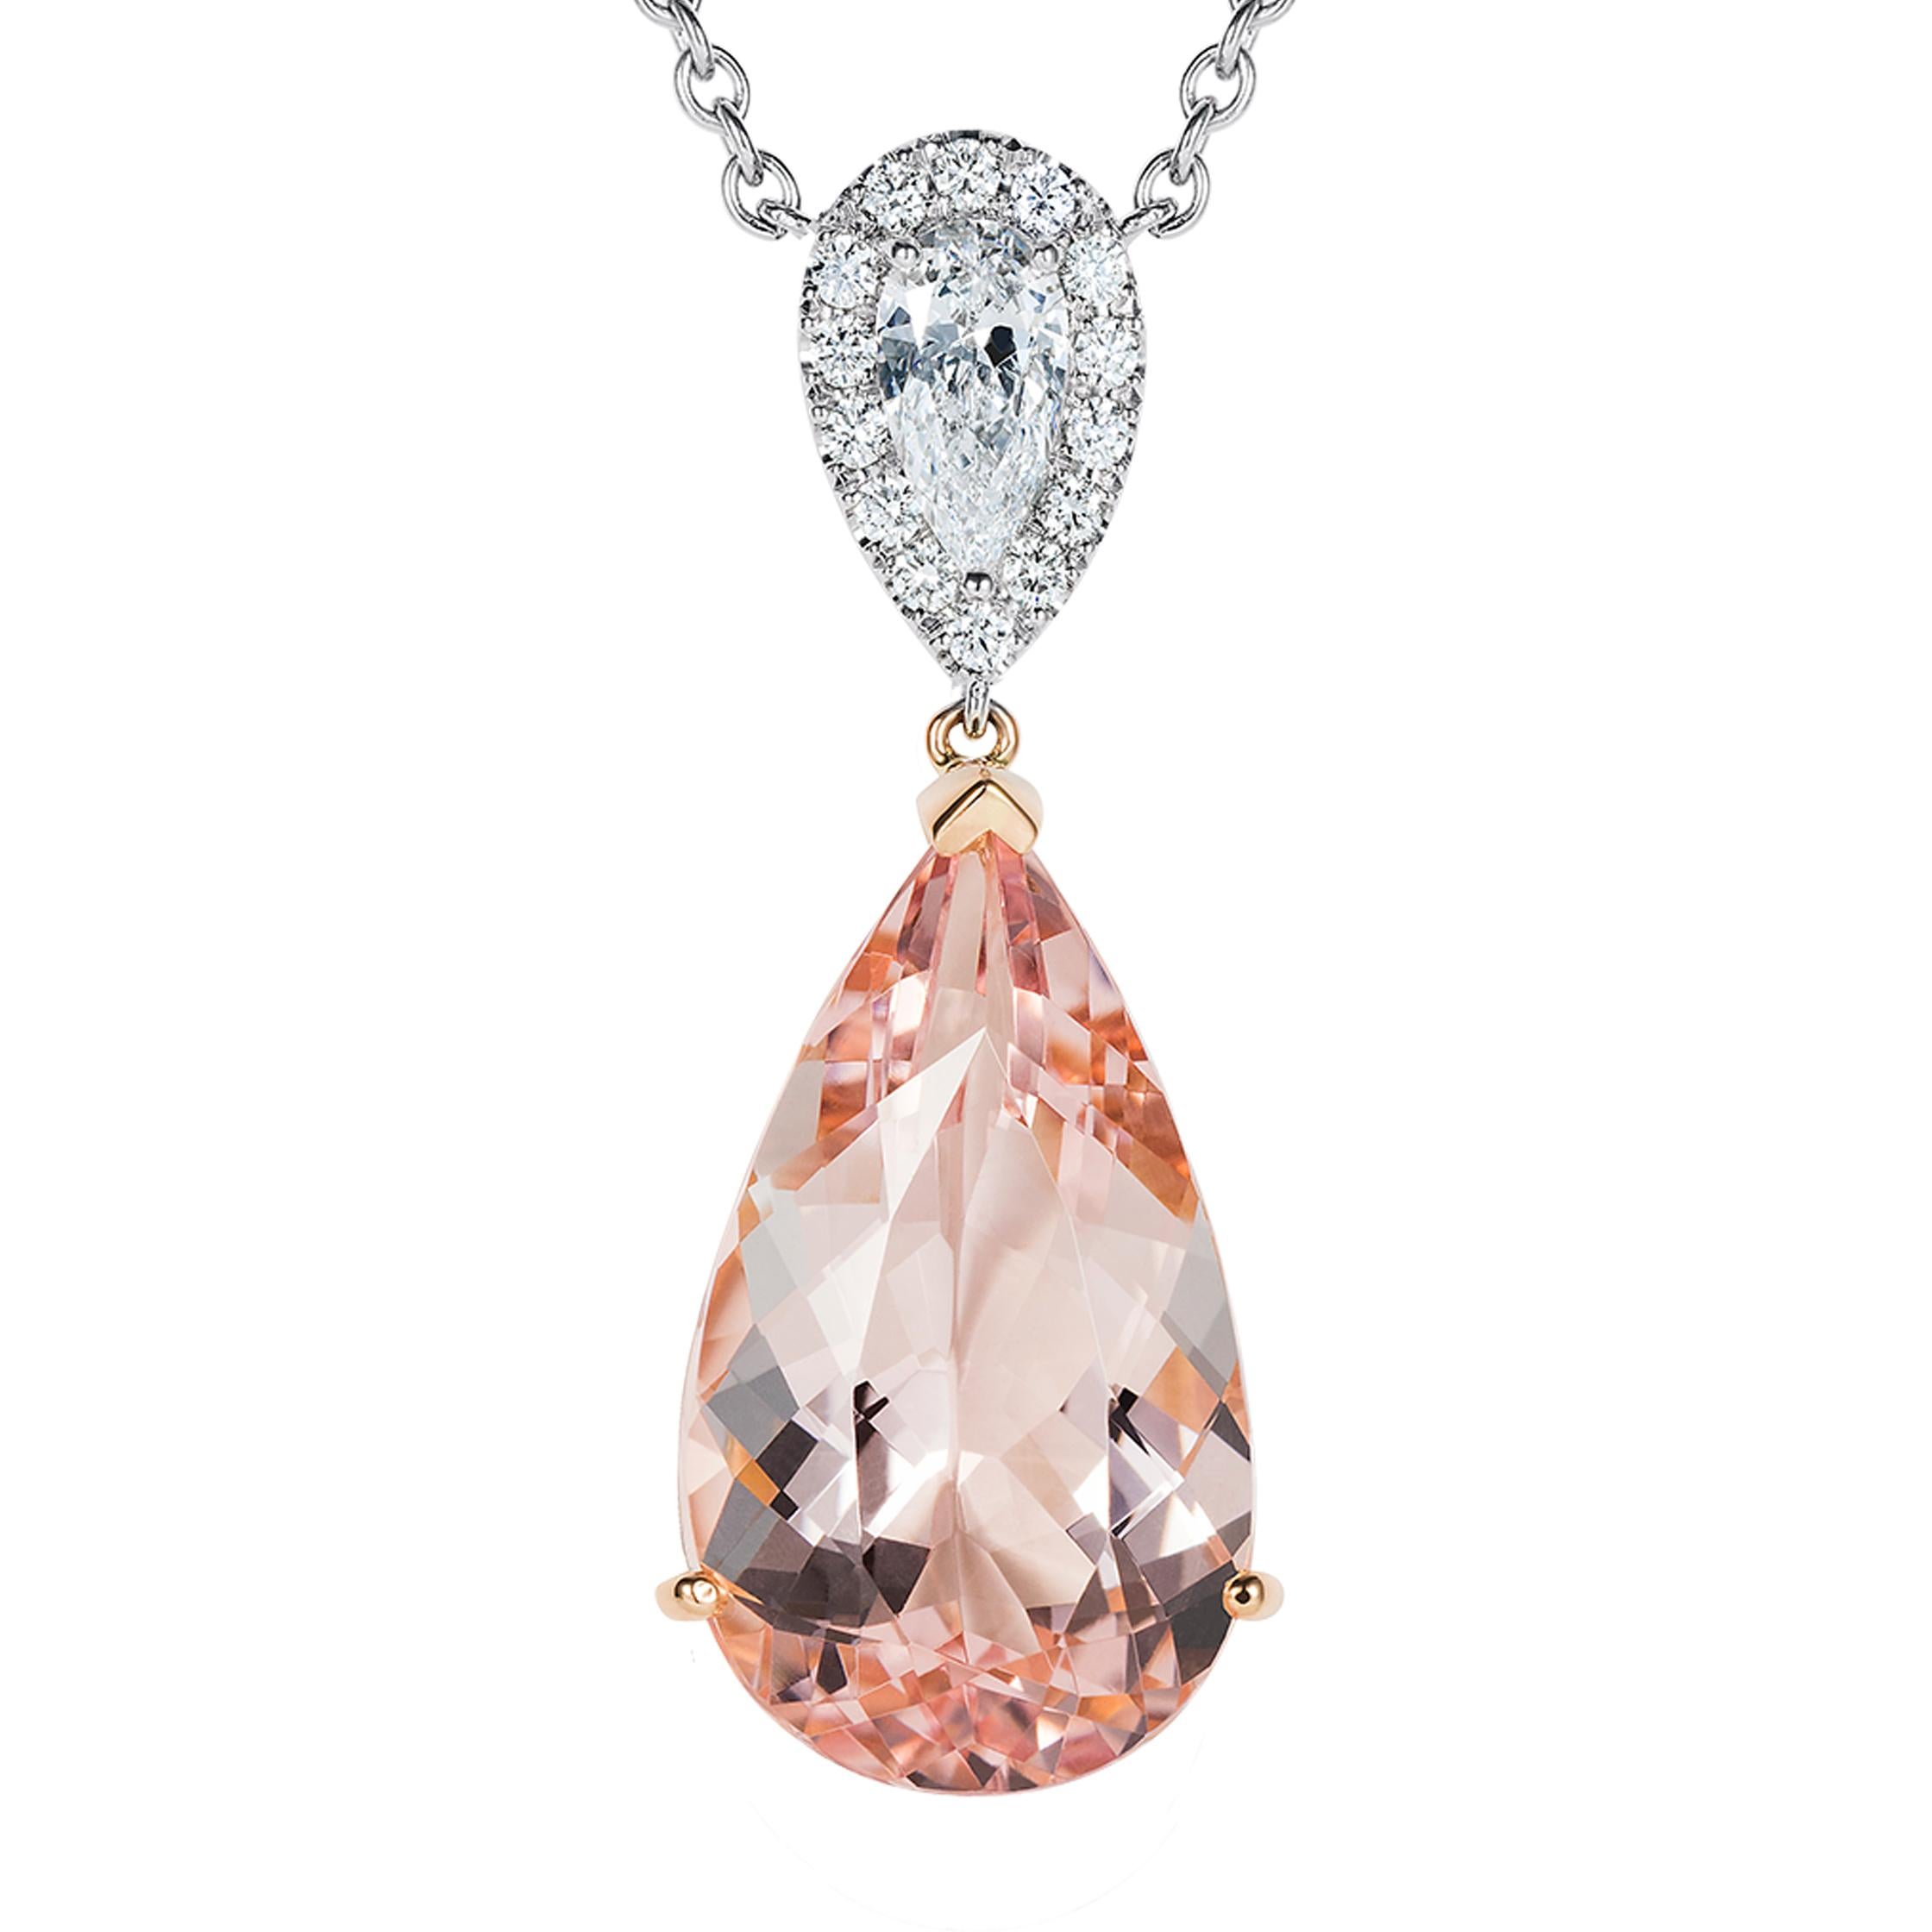 A beautiful, pear shape Morganite is set in the Hirsh Burlington setting below a diamond top. Created in 18K rose gold and platinum.

- 6.16 carat pear shape Morganite
- 0.40 carat pear shape diamond
- Further round diamonds weighing approx. 0.15